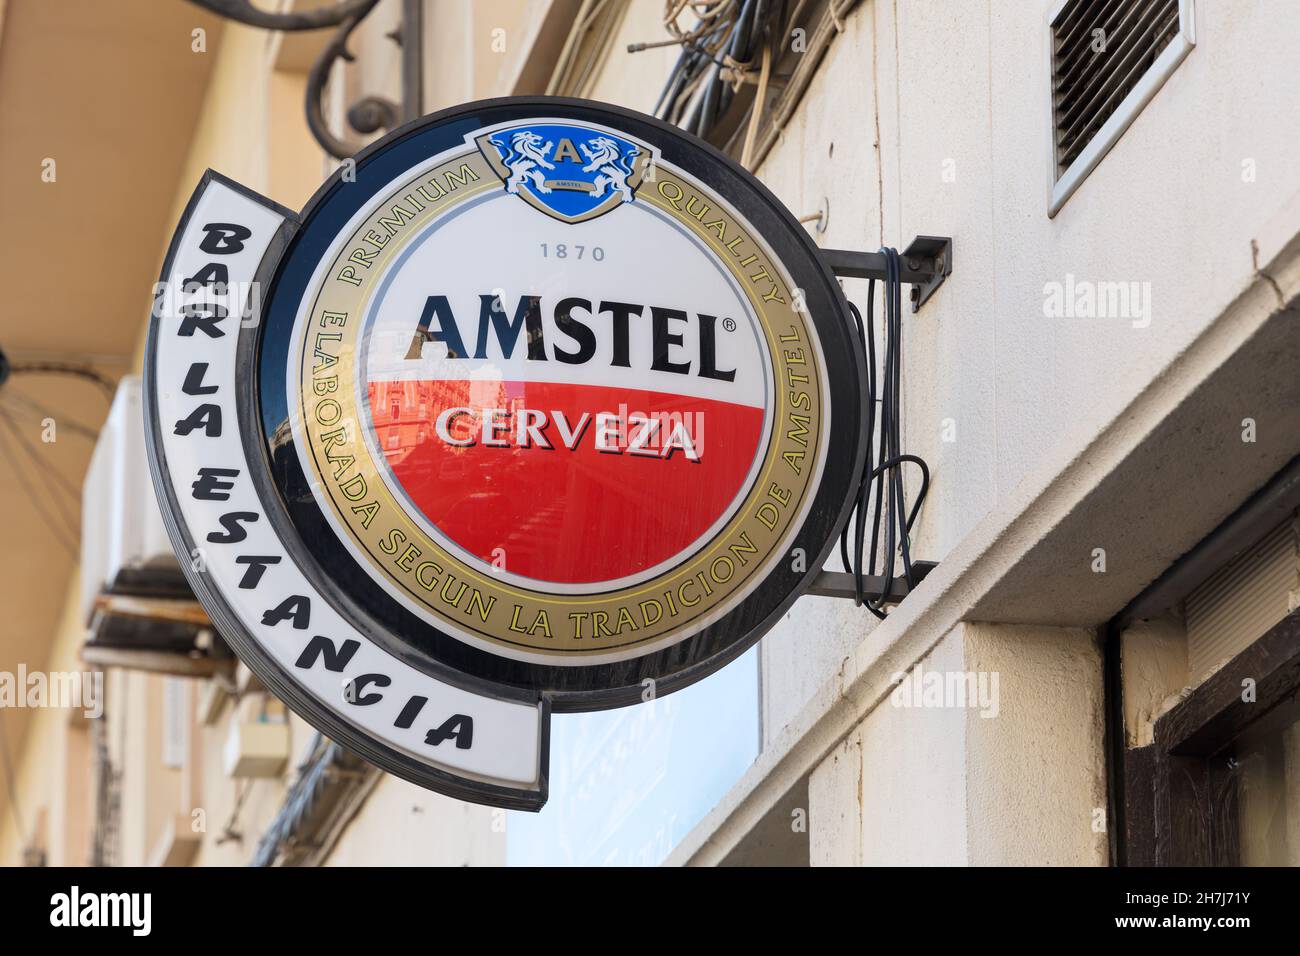 VALENCIA, SPAIN - NOVEMBER 23, 2021: Amstel is a Dutch brewery founded in 1870, owned by Heineken International since 1968 Stock Photo